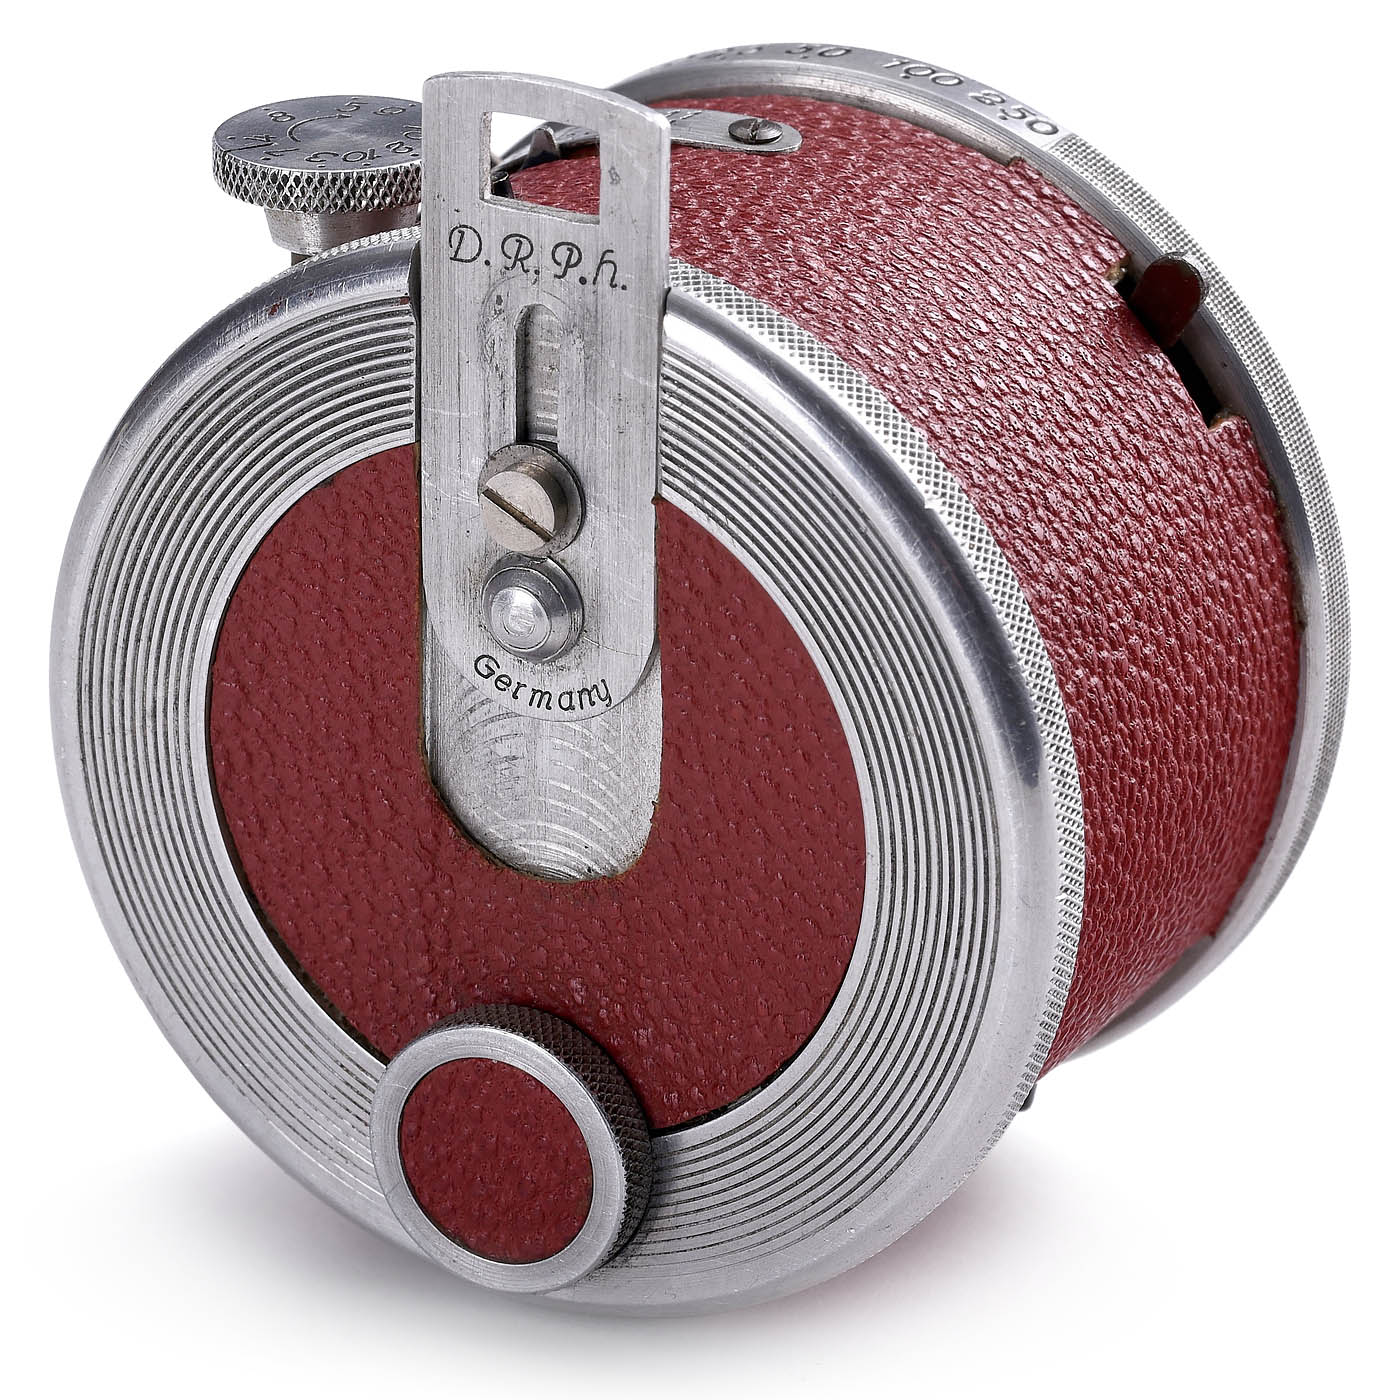 Fotal (Red) Miniature Camera, c. 1955 - Image 2 of 5